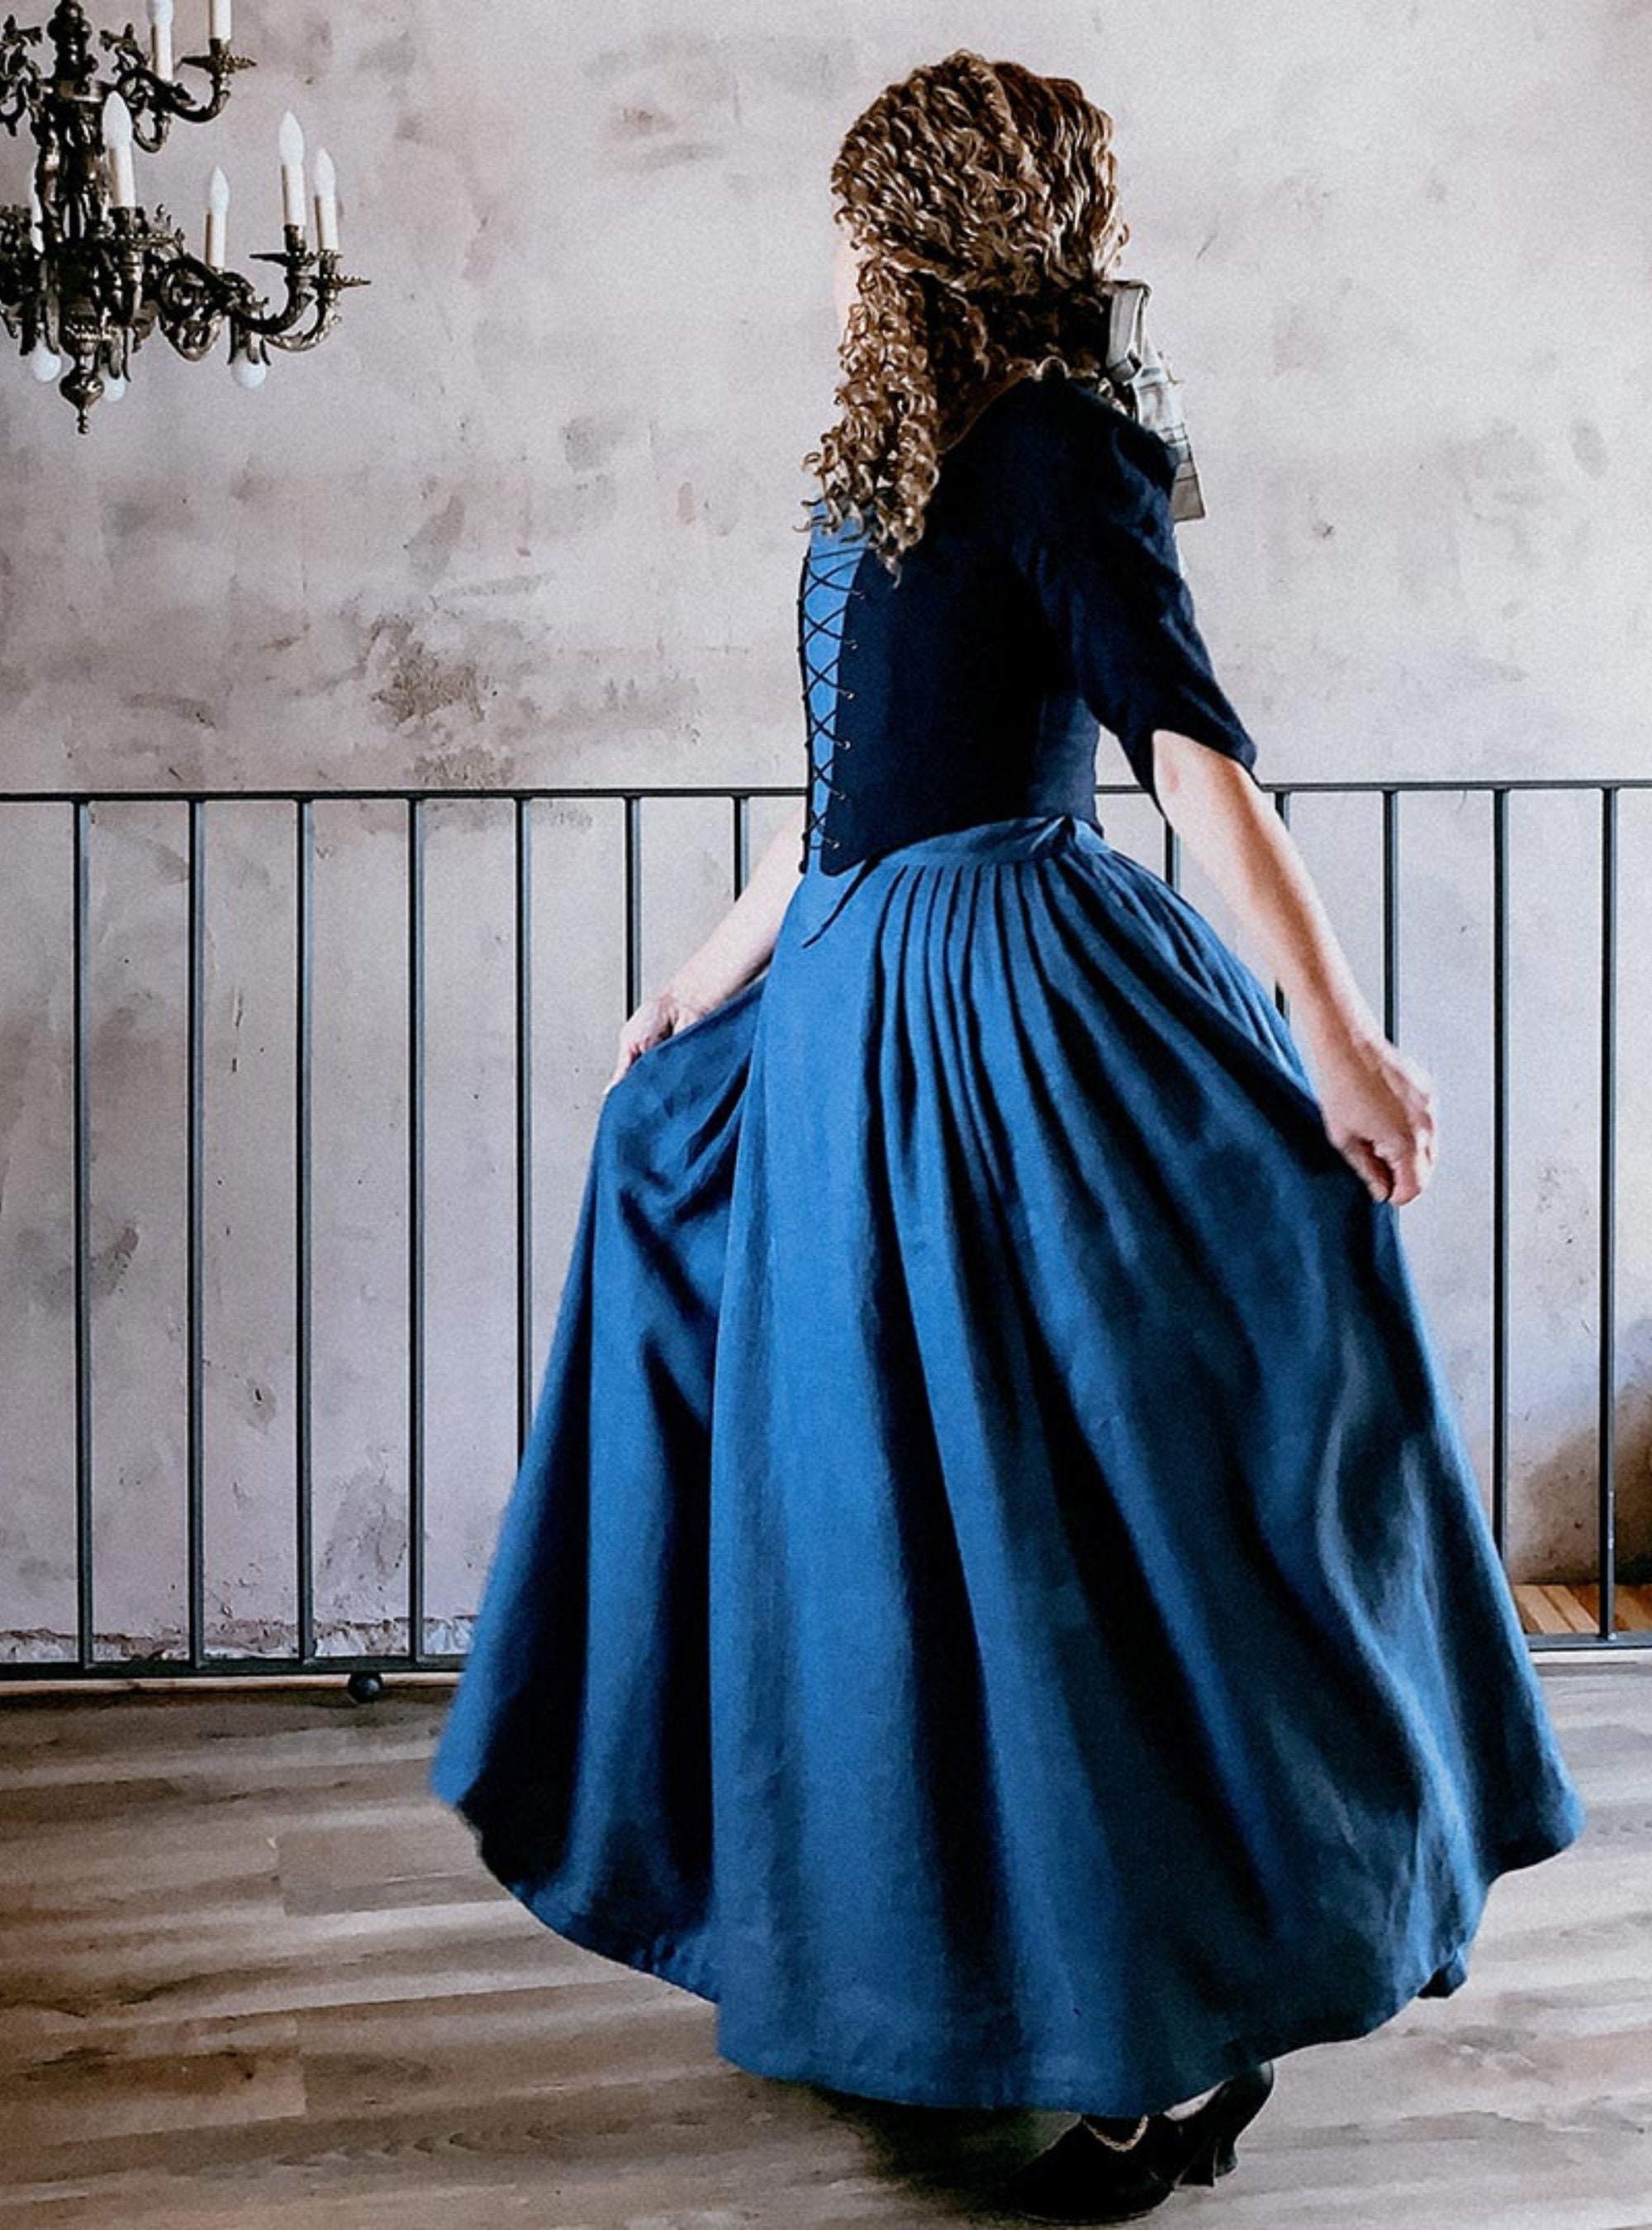 Sew 18th Century: The Crazy Brown Gown